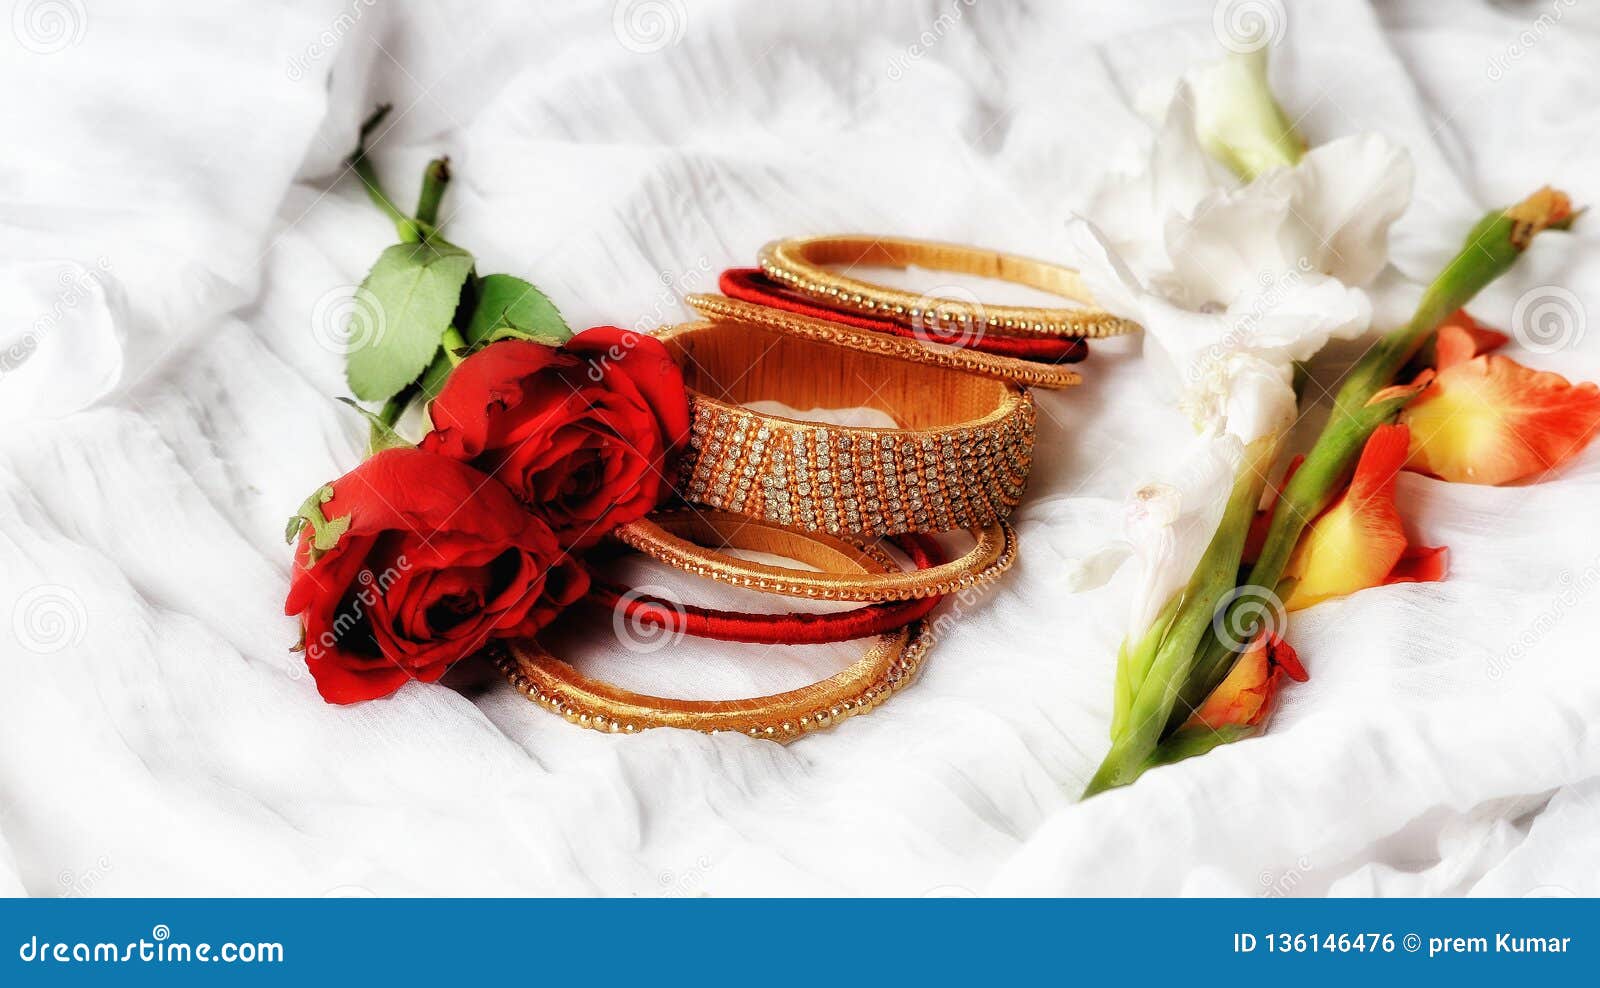 Bangle Wallpaper Red Roses Gifts Love Stock Photo - Image of roses, gifts:  136146476